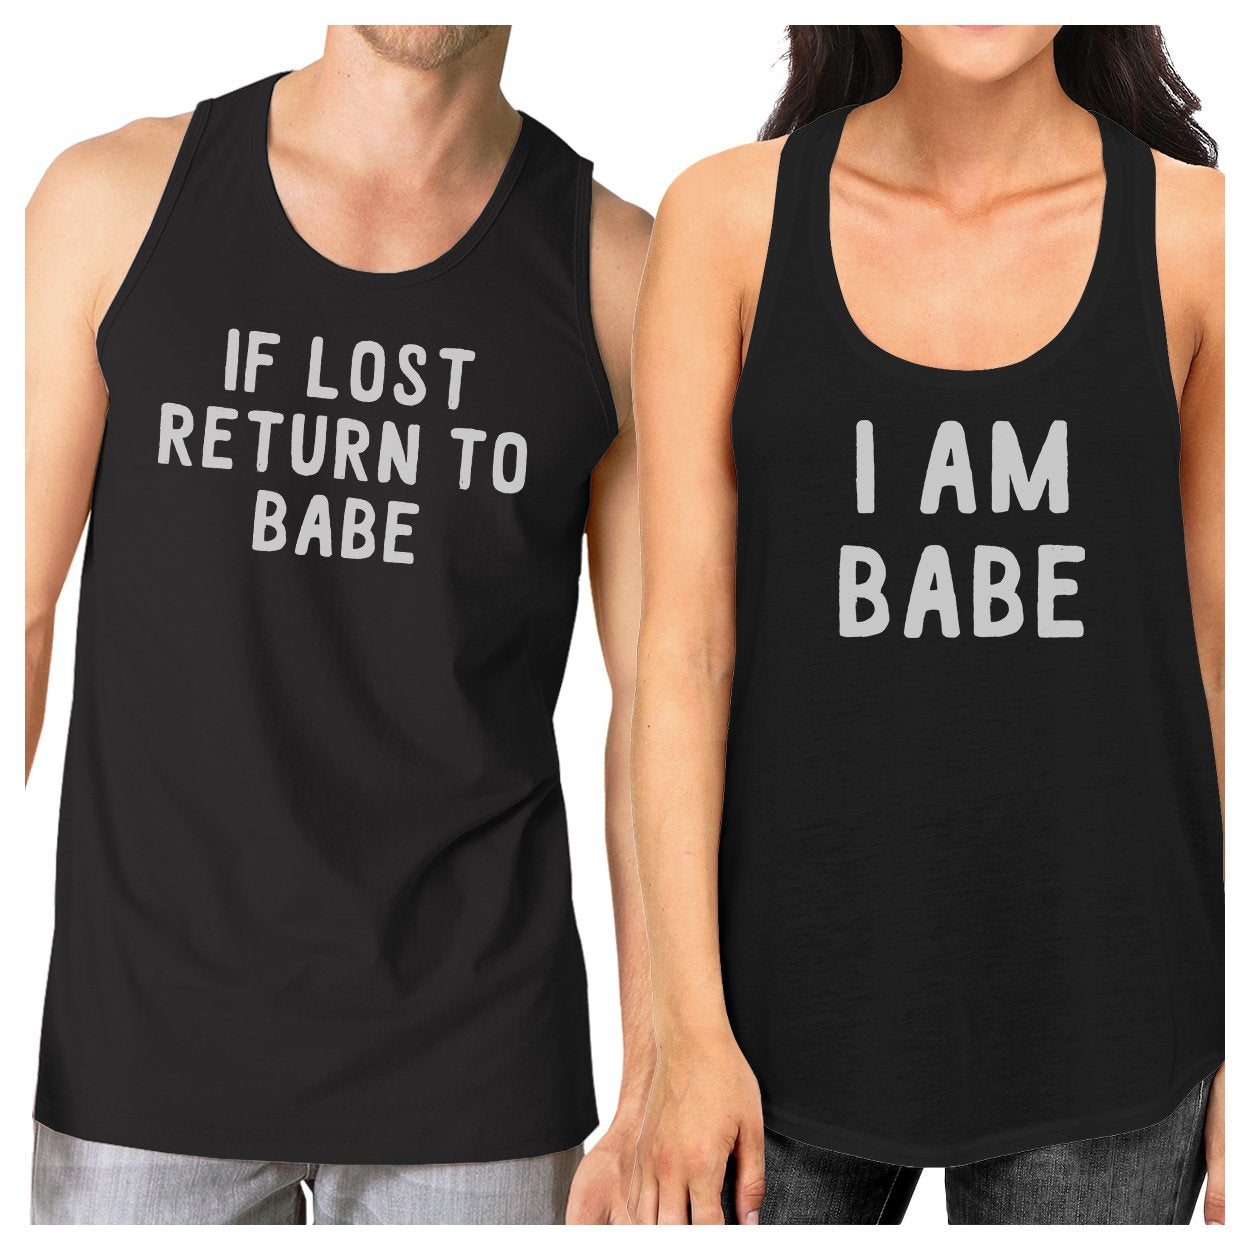 If Lost Return To Babe And I Am Babe Matching Couple Black Tank Tops